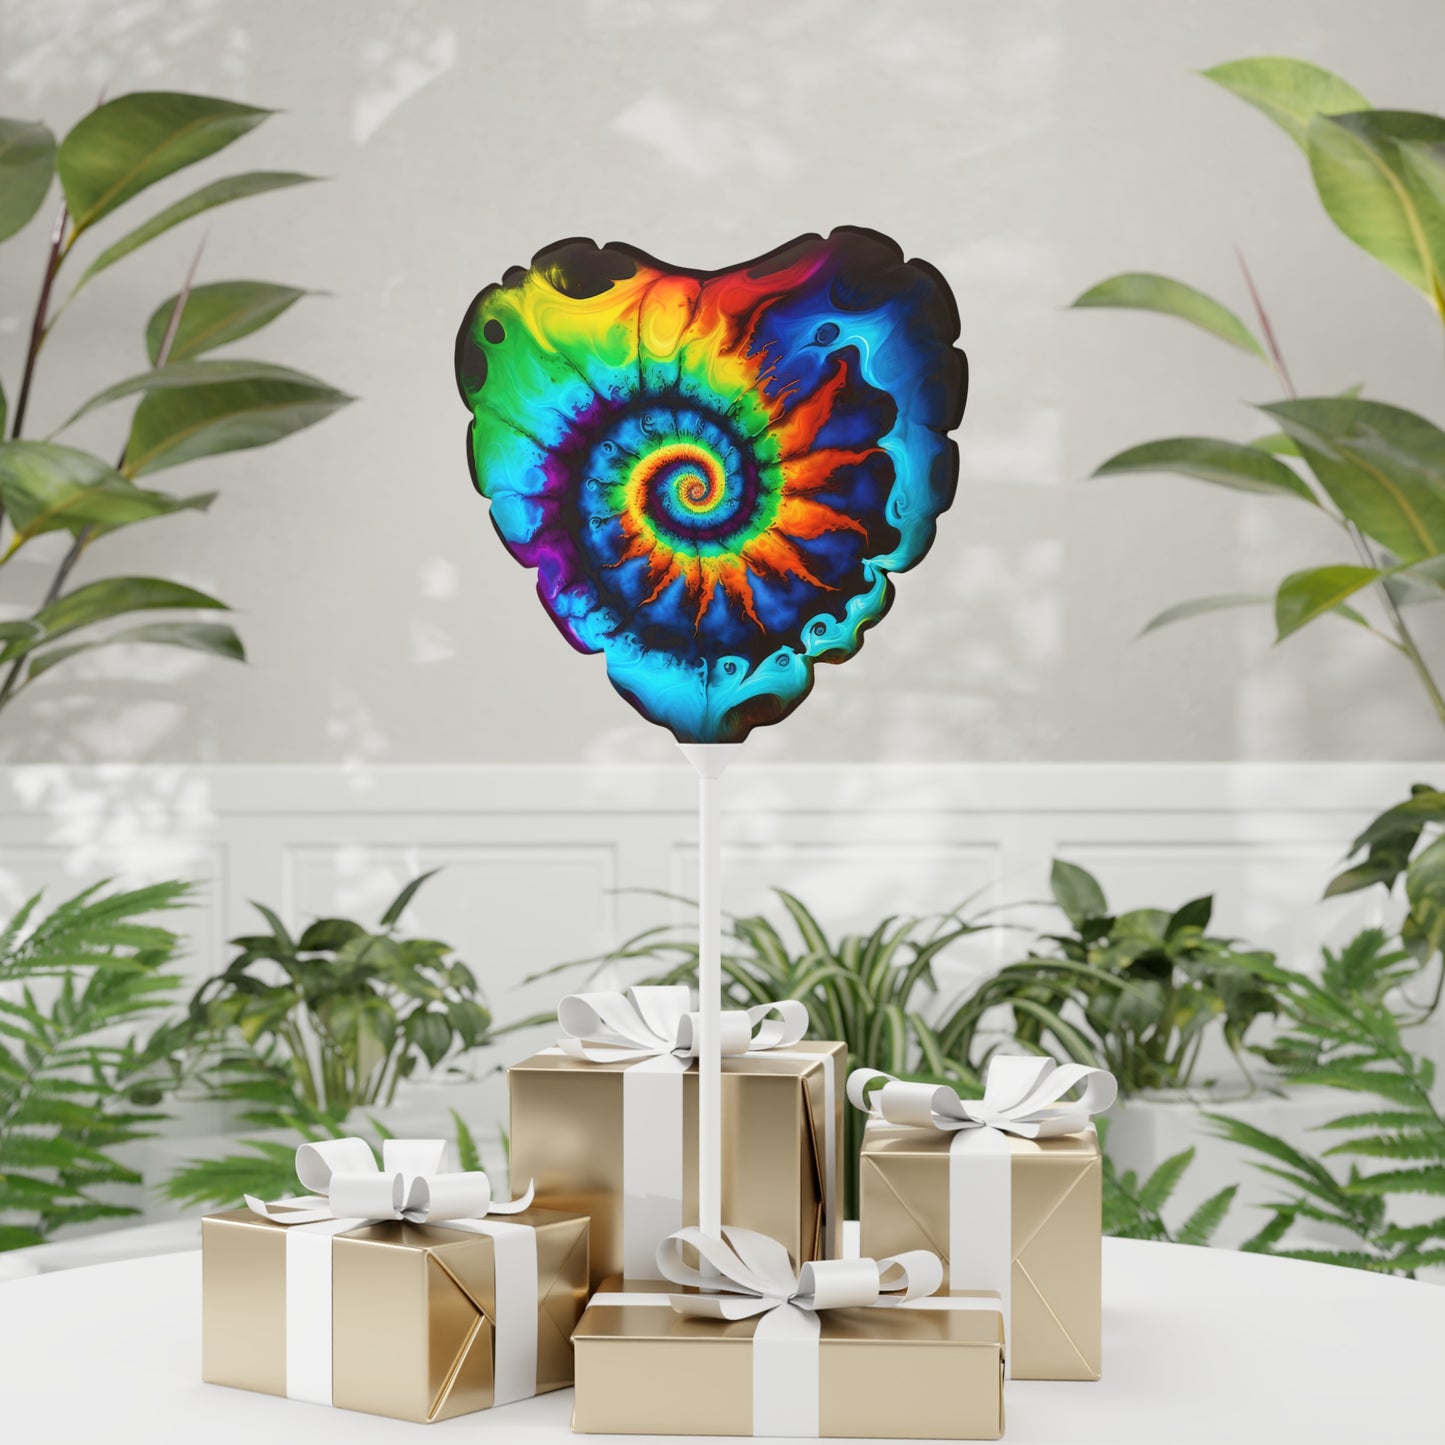 Bold And Beautiful Tie Dye Style One Balloon (Round and Heart-shaped), 11"